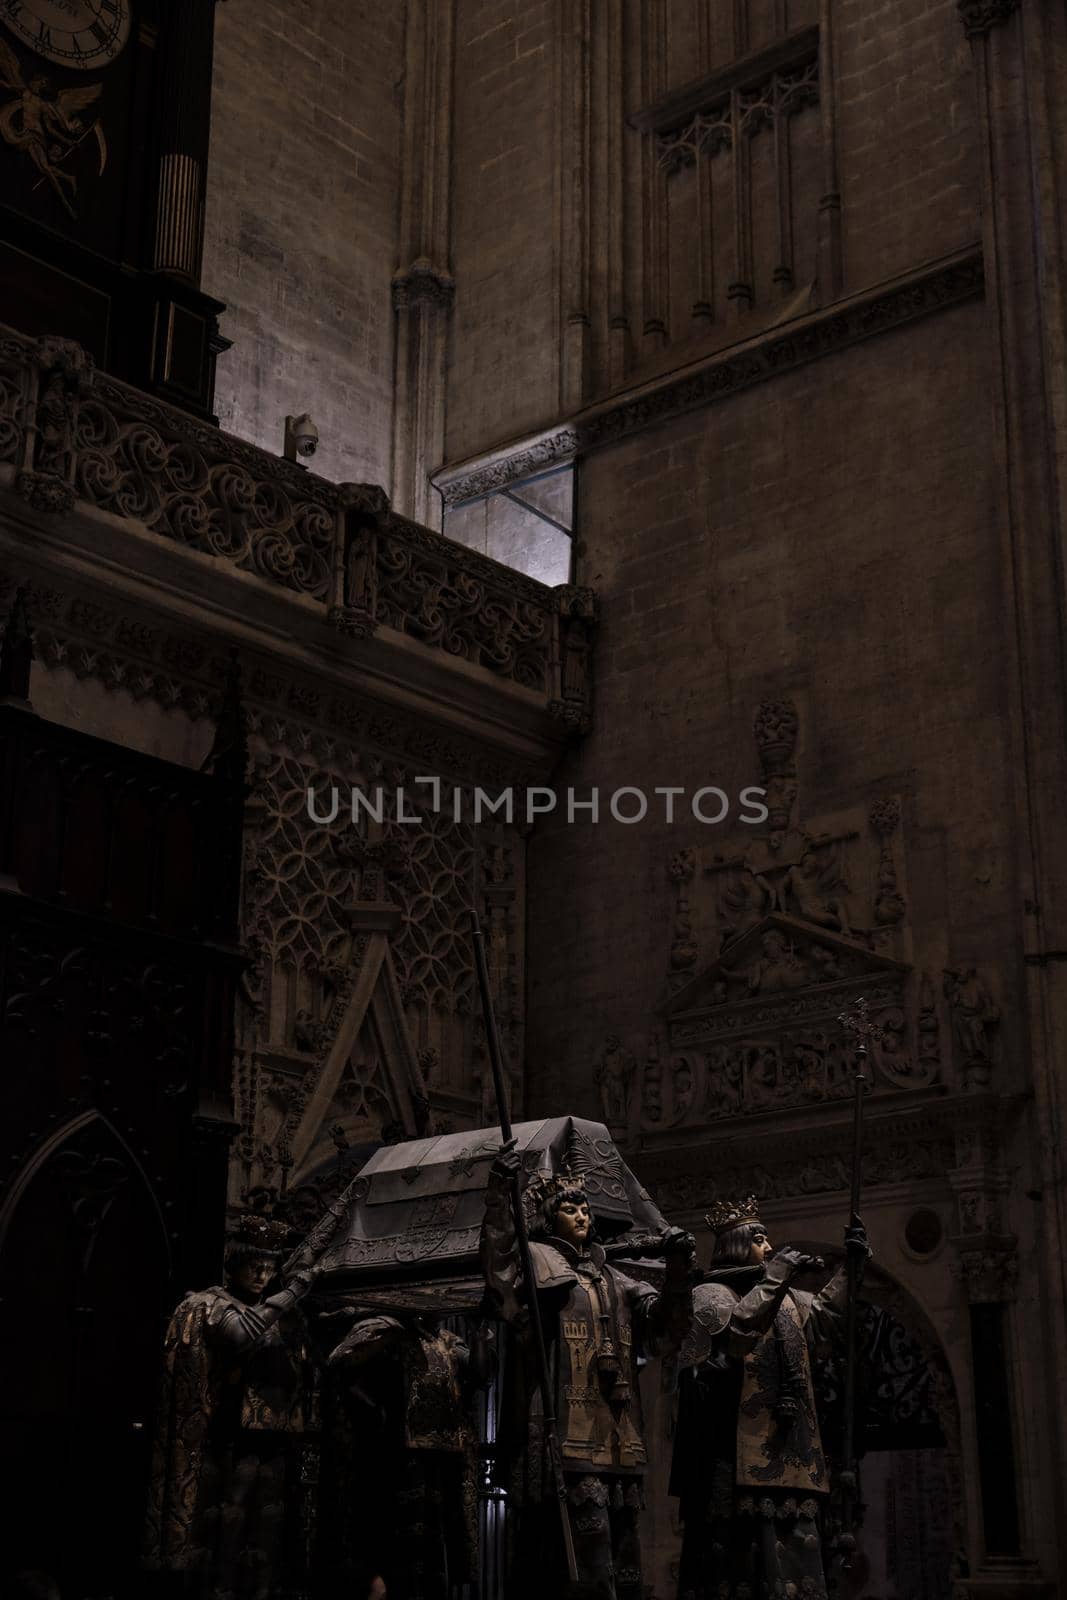 April 2019 Interior view of the Cathedral of Saint Mary of the See (Seville Cathedral) in Seville, Andalusia, Spain